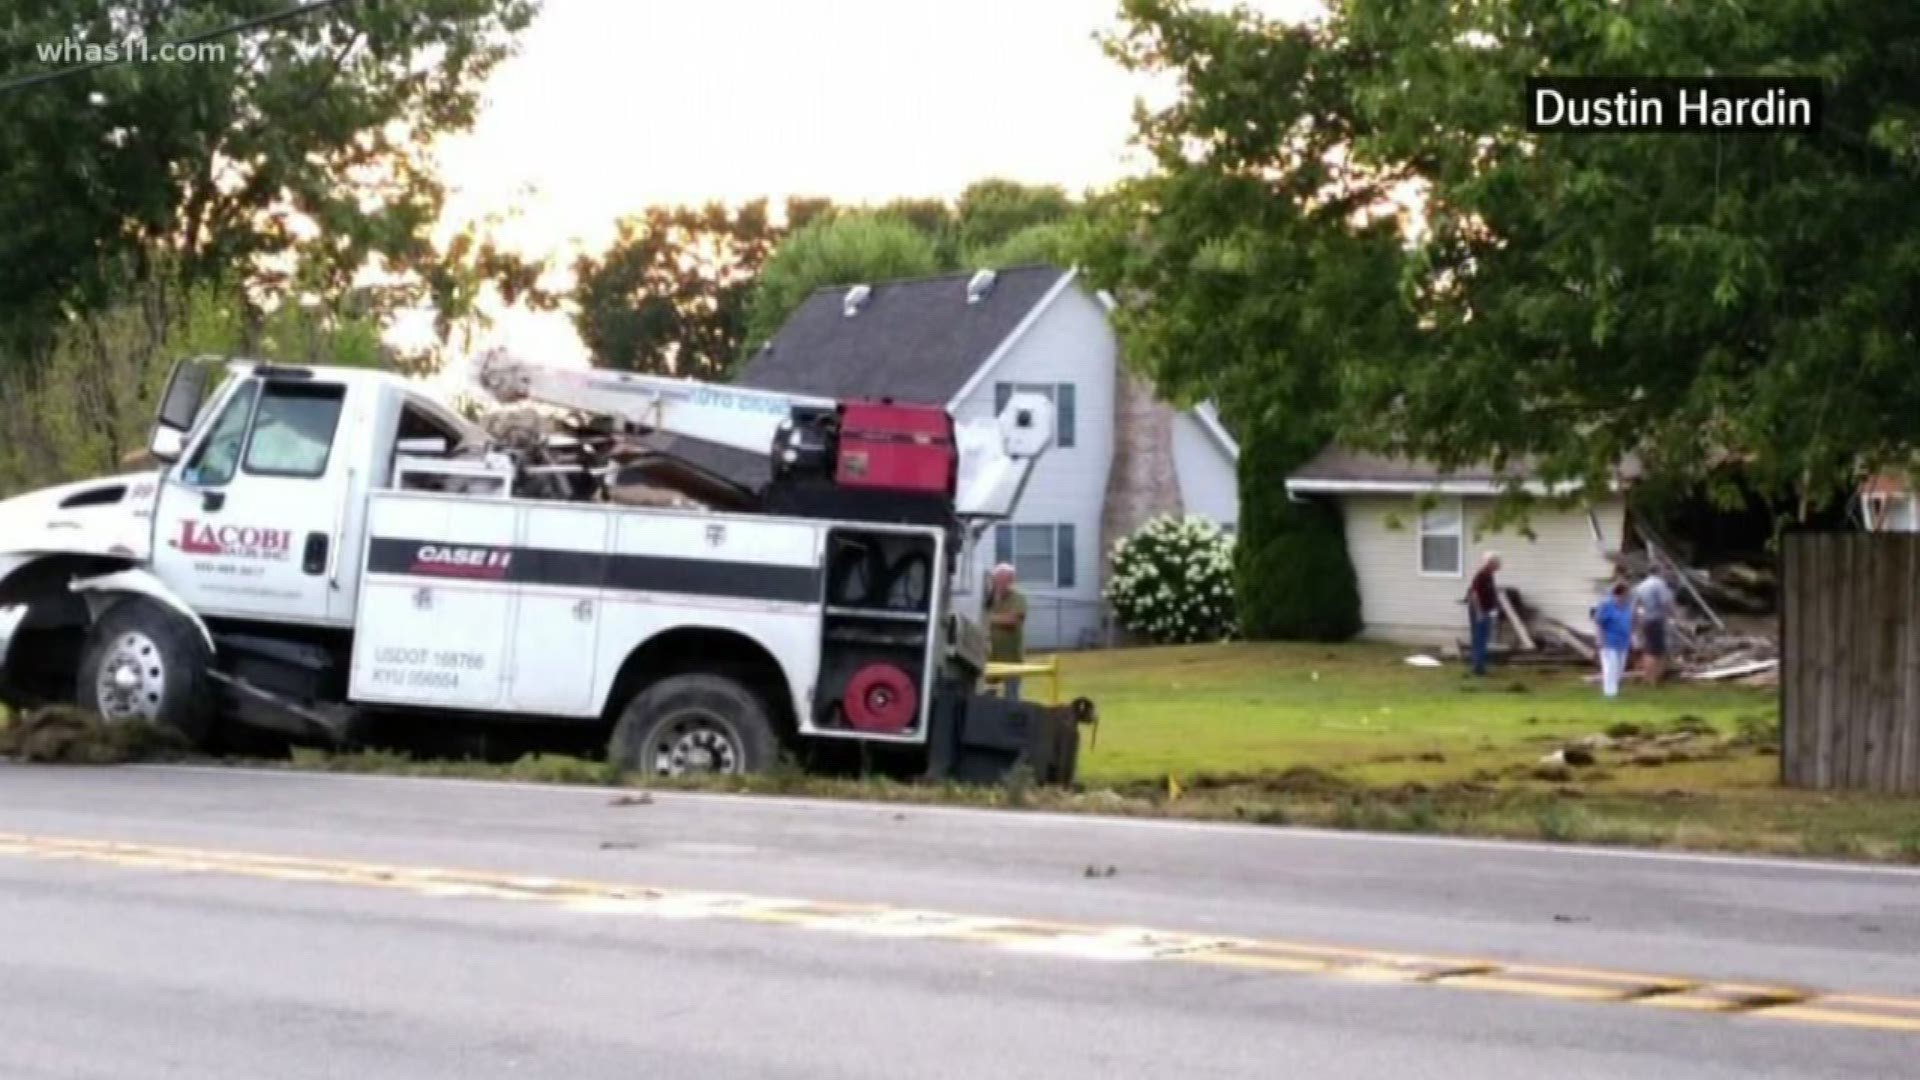 A scary evening for a Scottsburg homeowner when a truck comes crashing into their house.